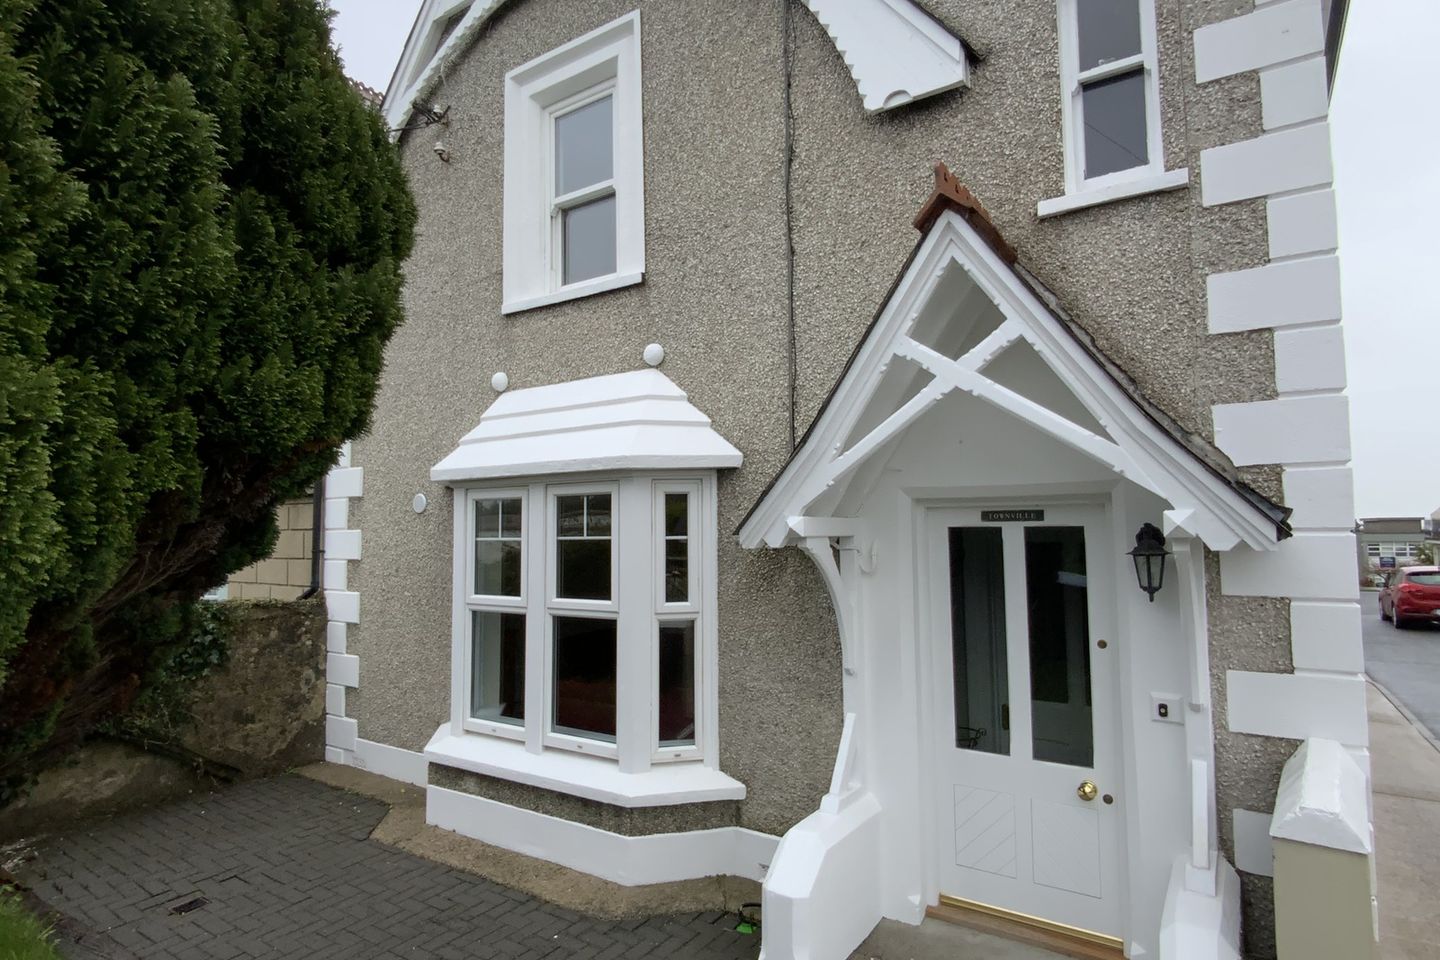 1 Townville, Saint Mary's Road, Arklow, Co. Wicklow, Y14YF70